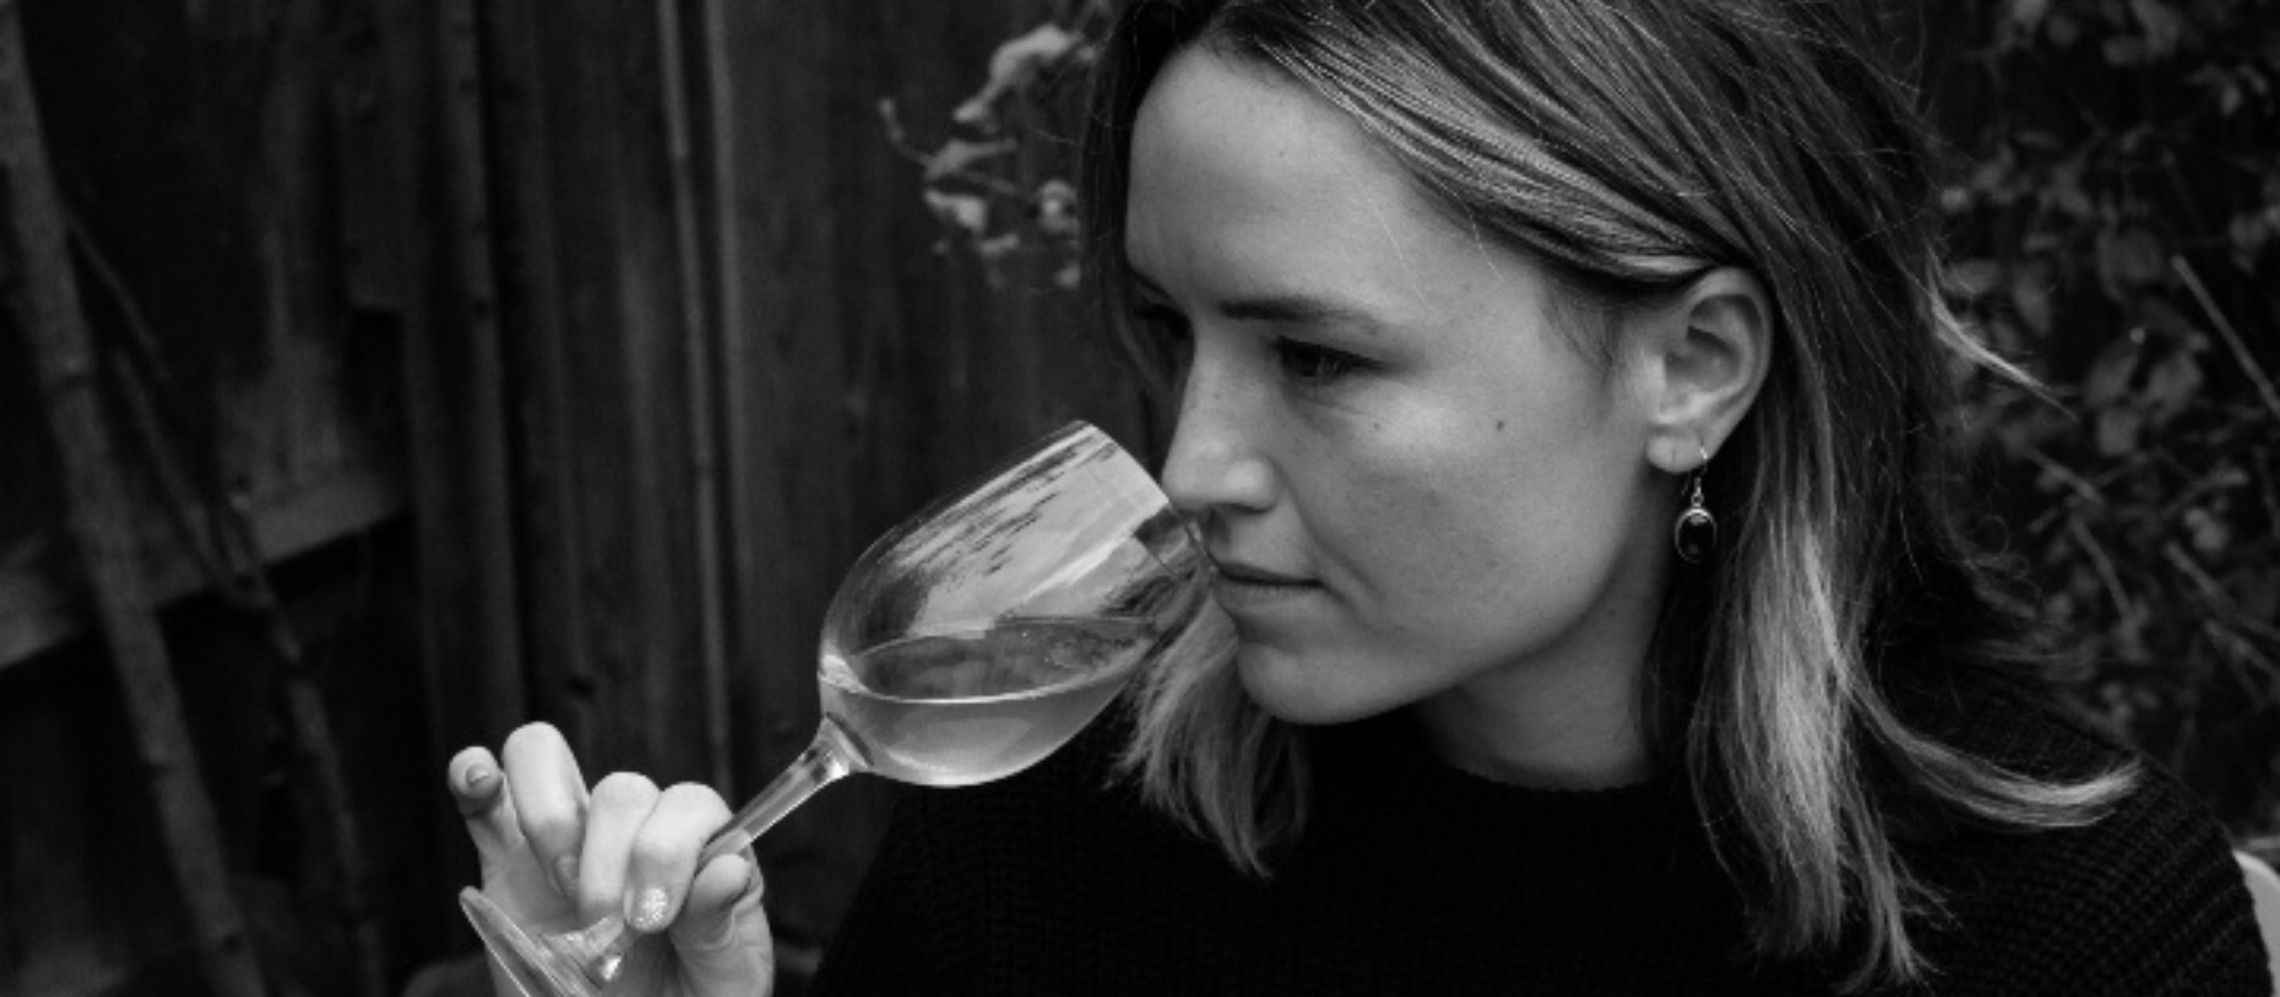 Photo for: Amber Gardner on making it to the top as a sommelier 